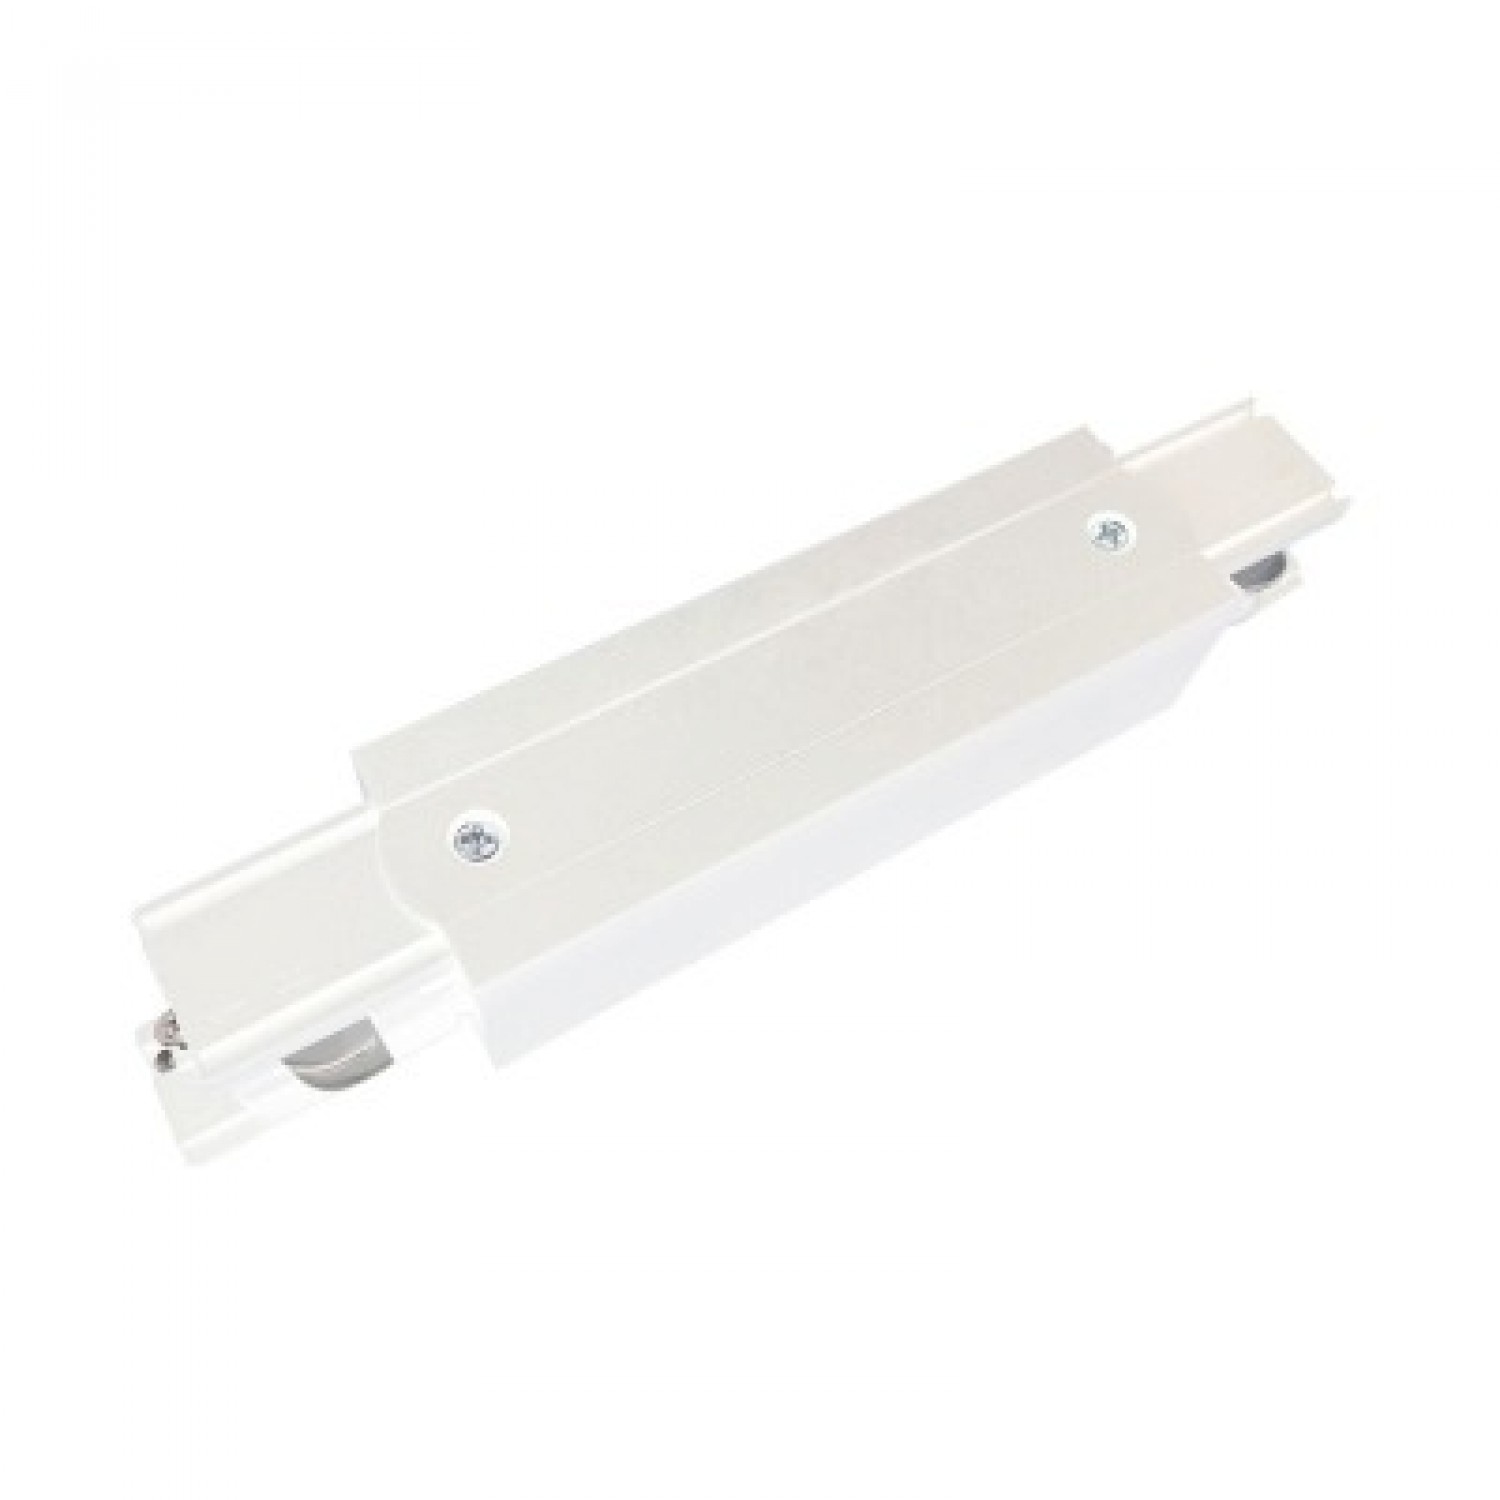 alt_image Компонент Zuma Line Middle connector power supply, white, 3-PHASE 9080